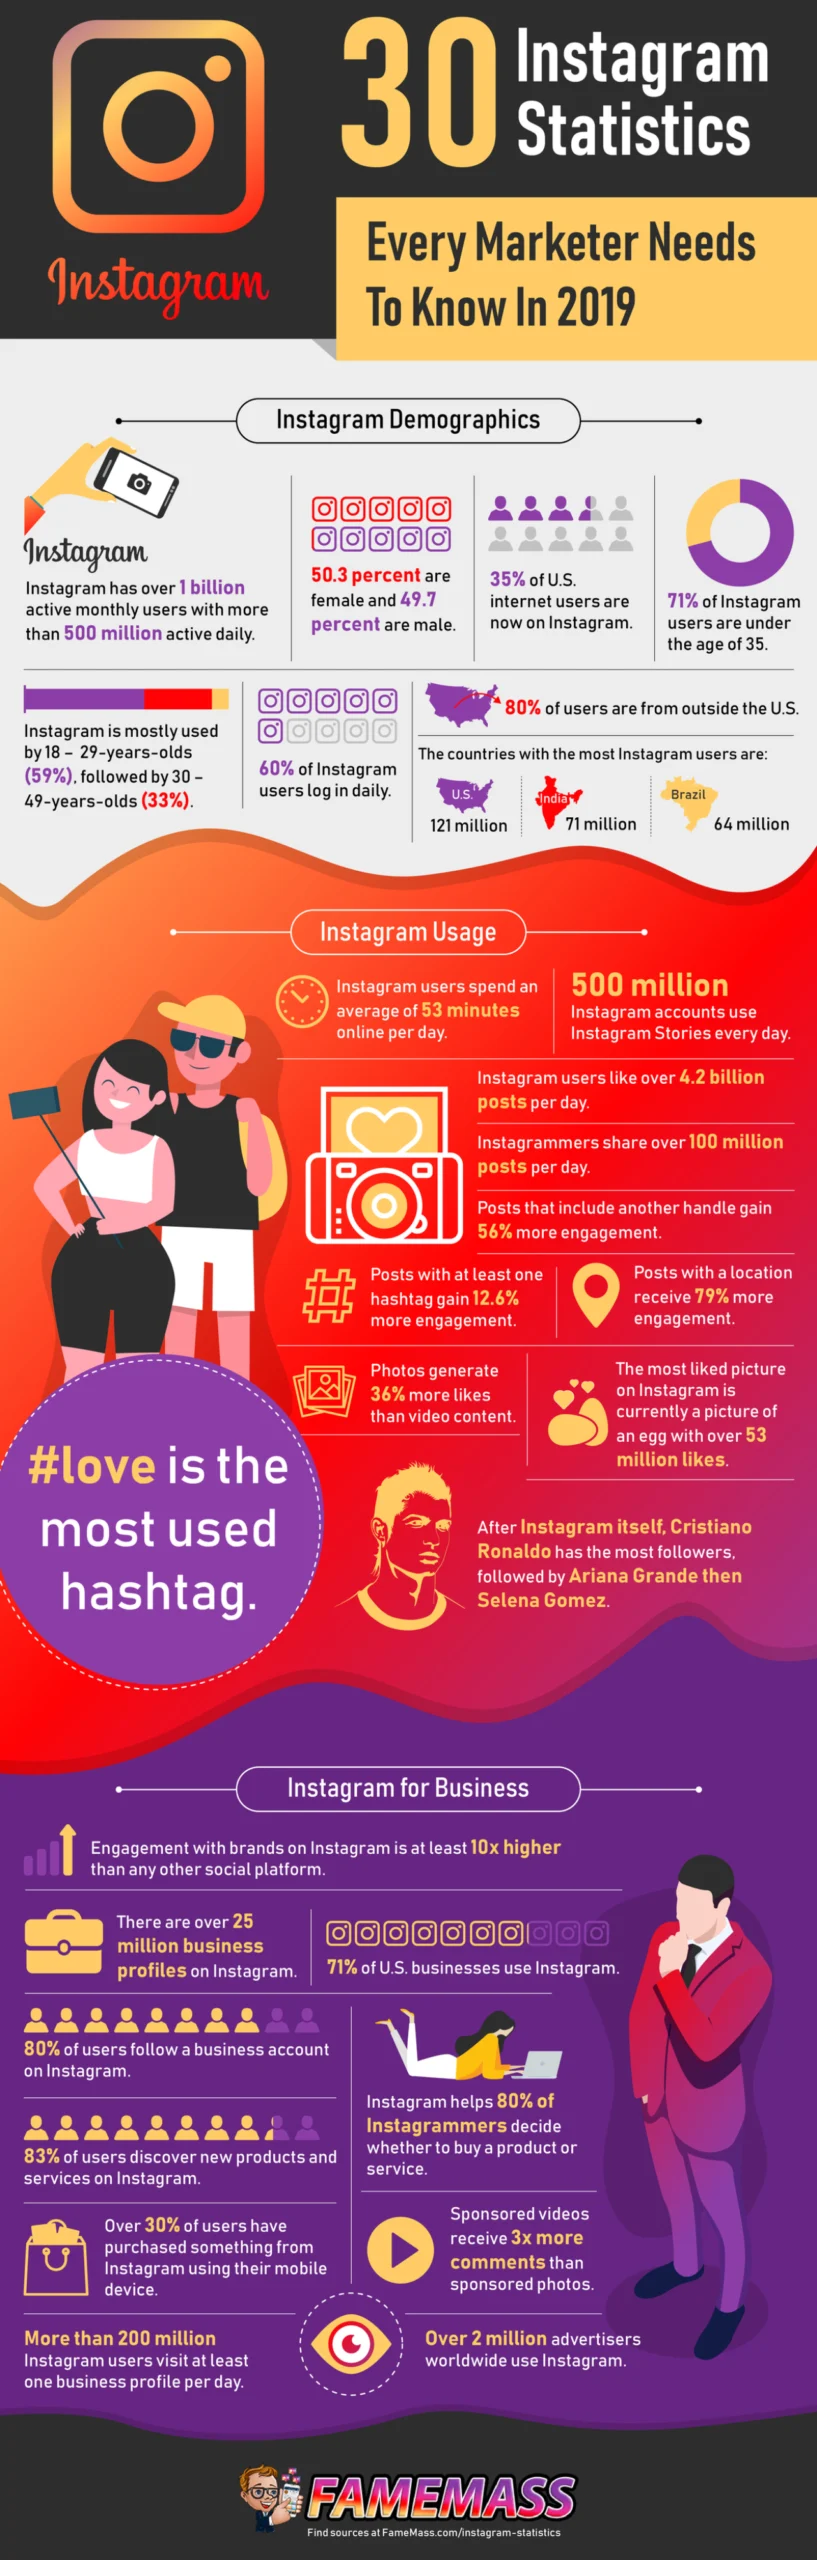 30 Instagram Statistics – Every Marketer Needs To Know In 2019